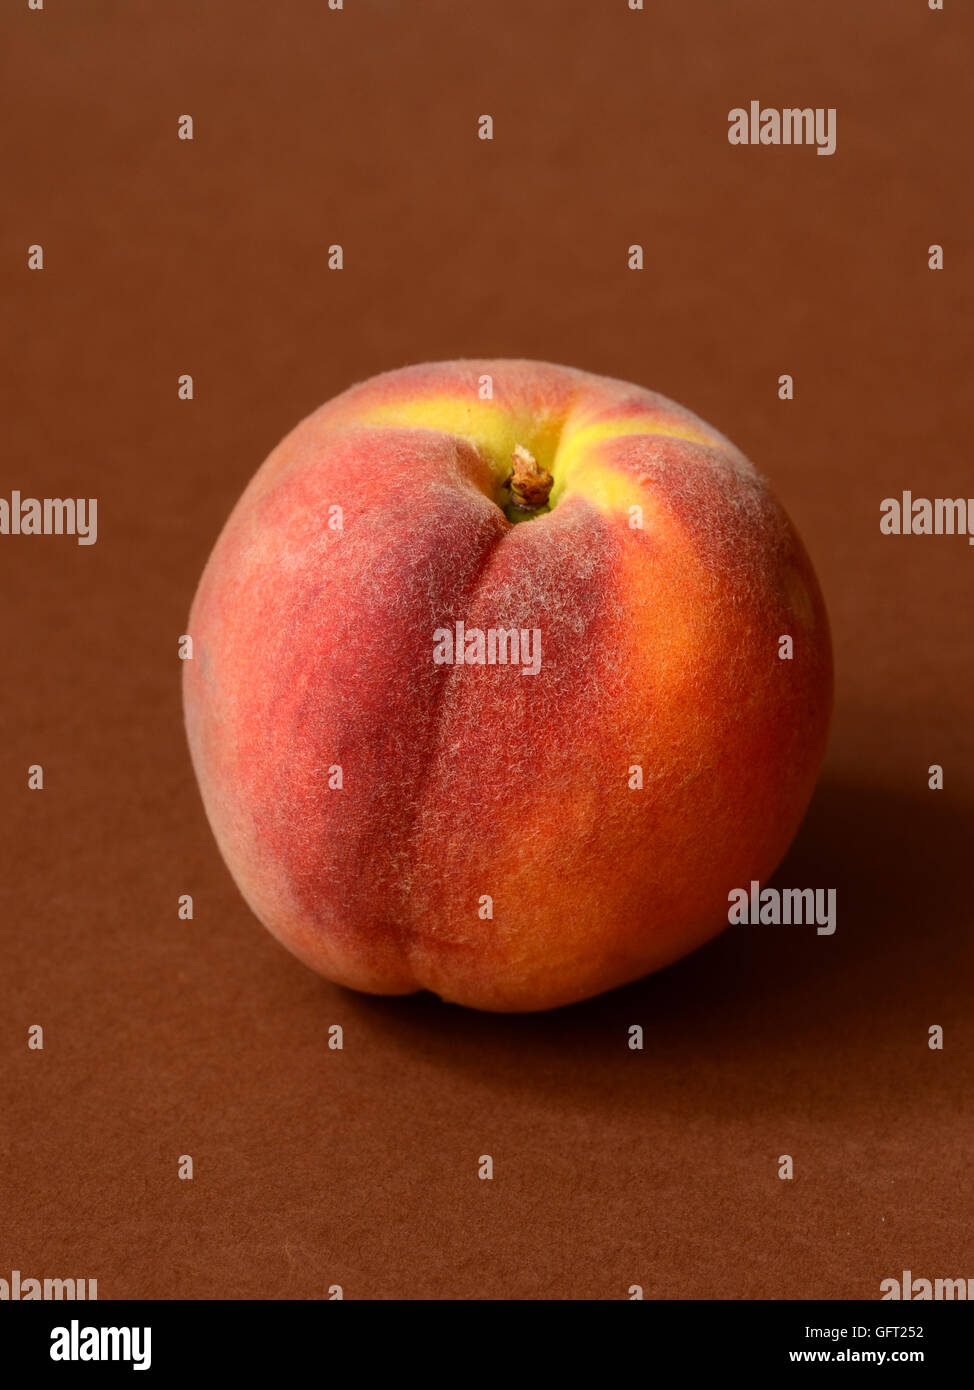 One ripe peach on a brown background Stock Photo